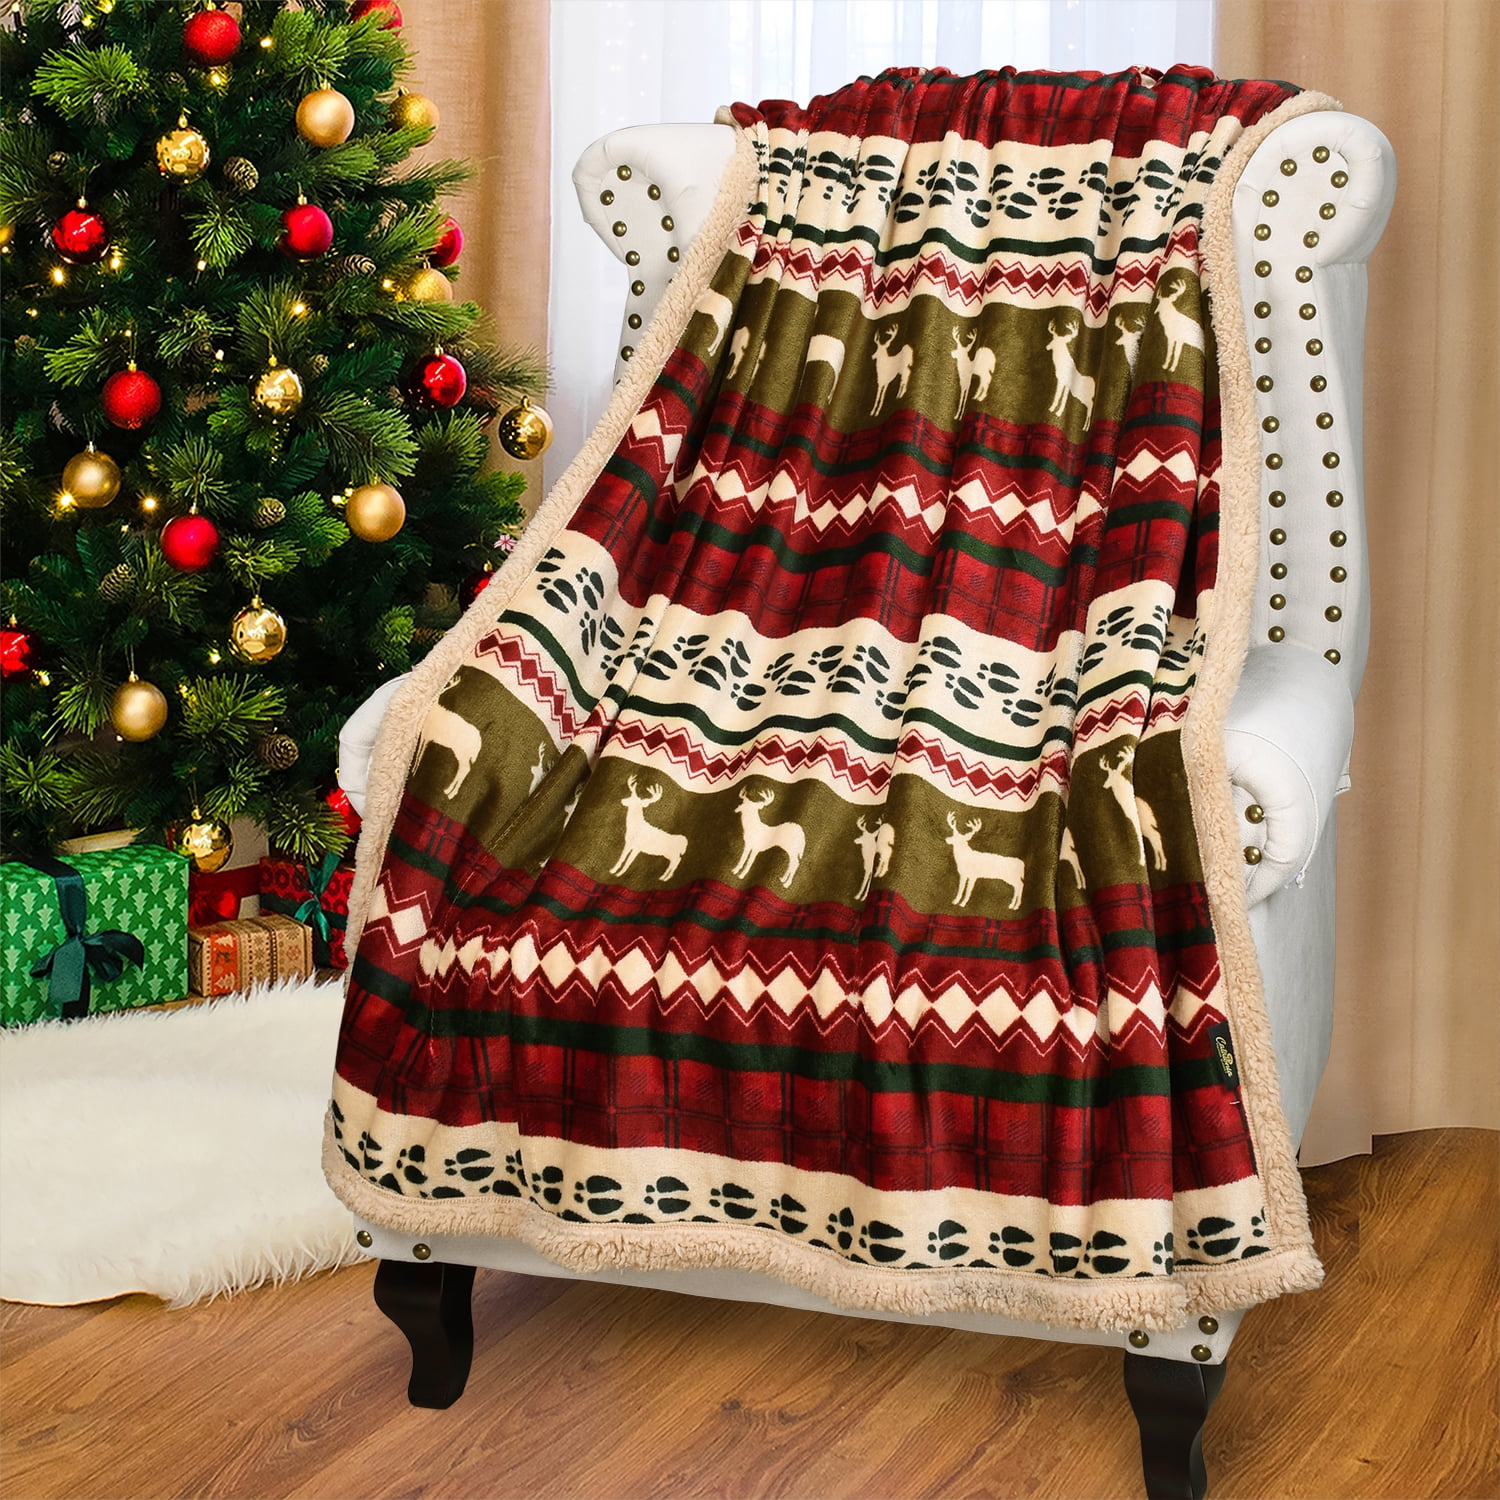 Colorful Lights Christmas Tree Cozy Throw Blanket for Couch Super Soft Warm Blanket for Adults Kids Lightweight Throws Size for Bed Sofa 